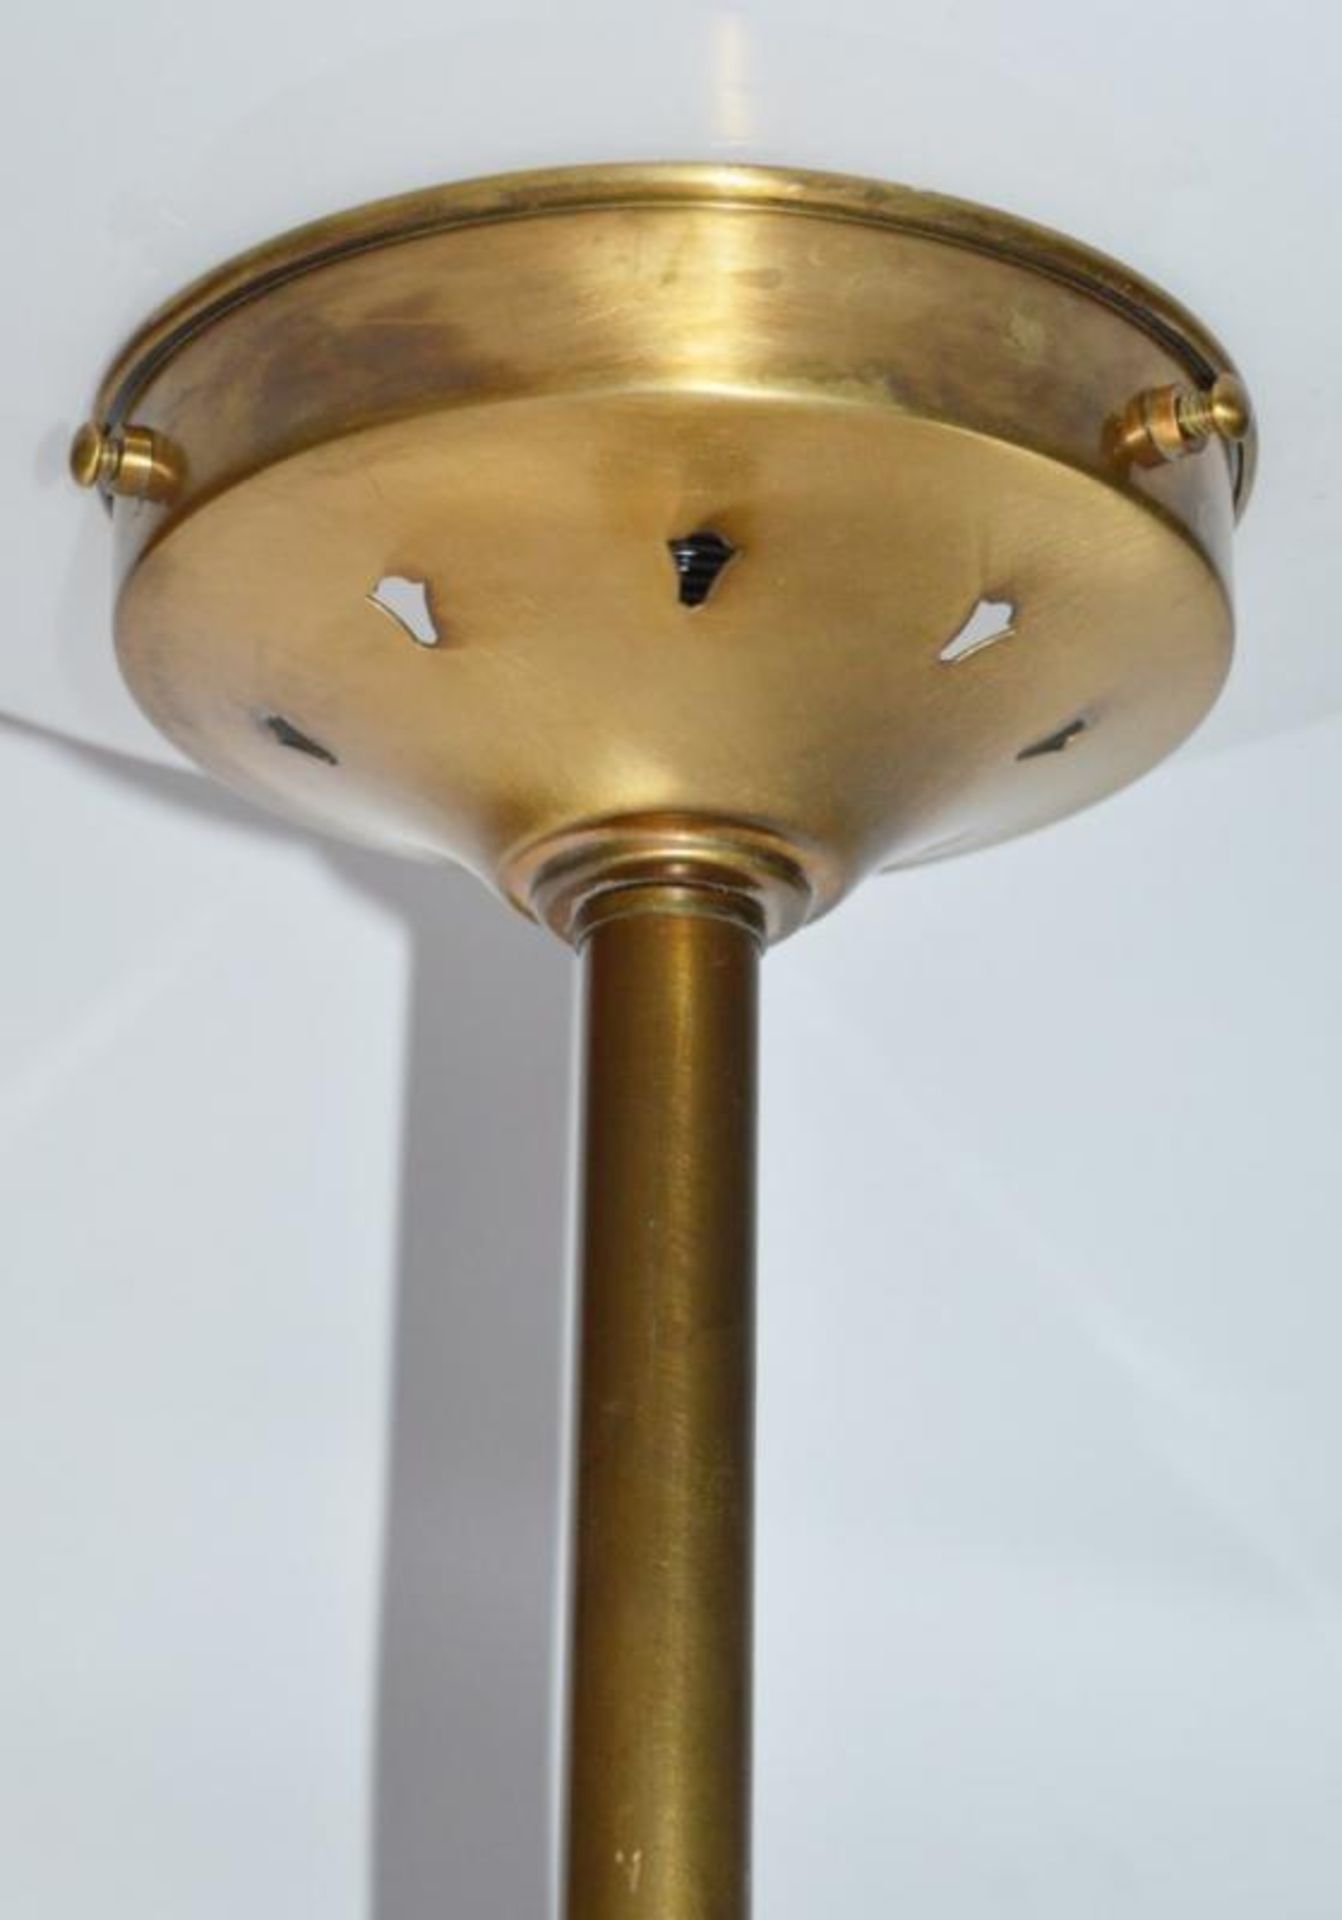 4 x Art Deco Style Ceiling Lights With Brass Bases and White Opal Glass Shades - Recently Removed Fr - Image 5 of 11